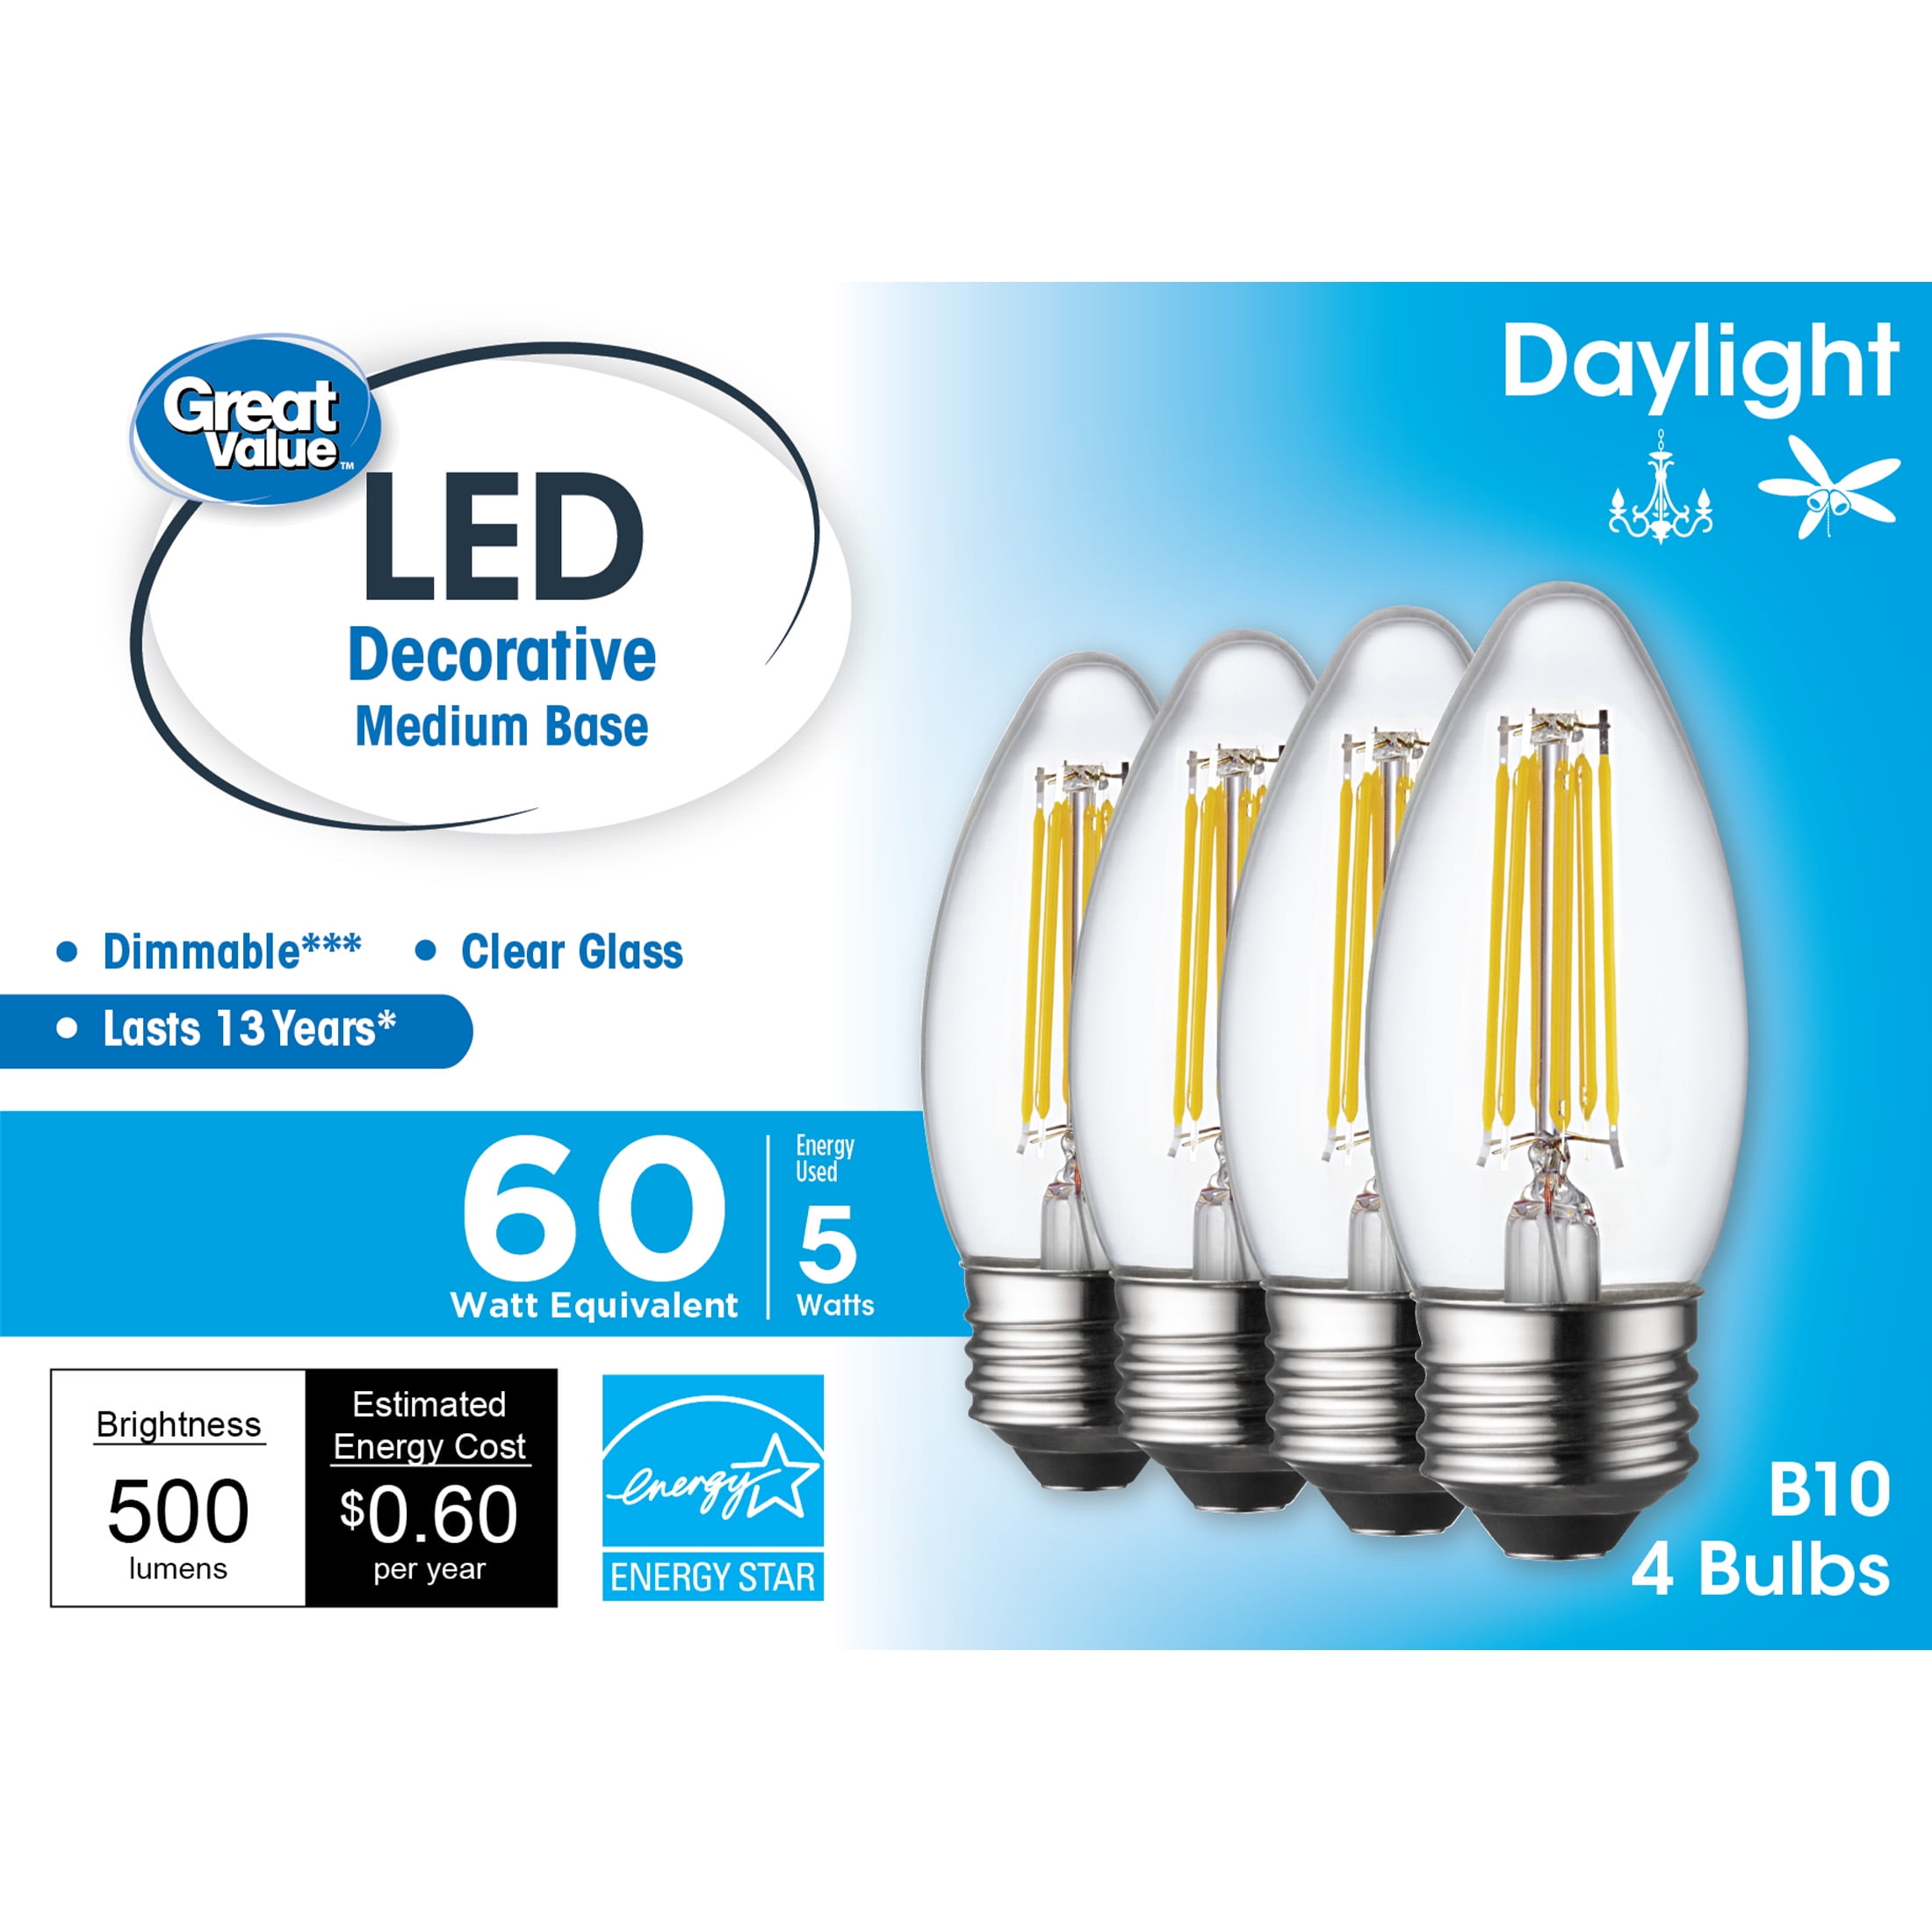 Great Value LED Light Bulb, 5.5 Watts (60W Equivalent) B10 Deco Lamp E26 Medium Base, Dimmable, Daylight, 4-Pack